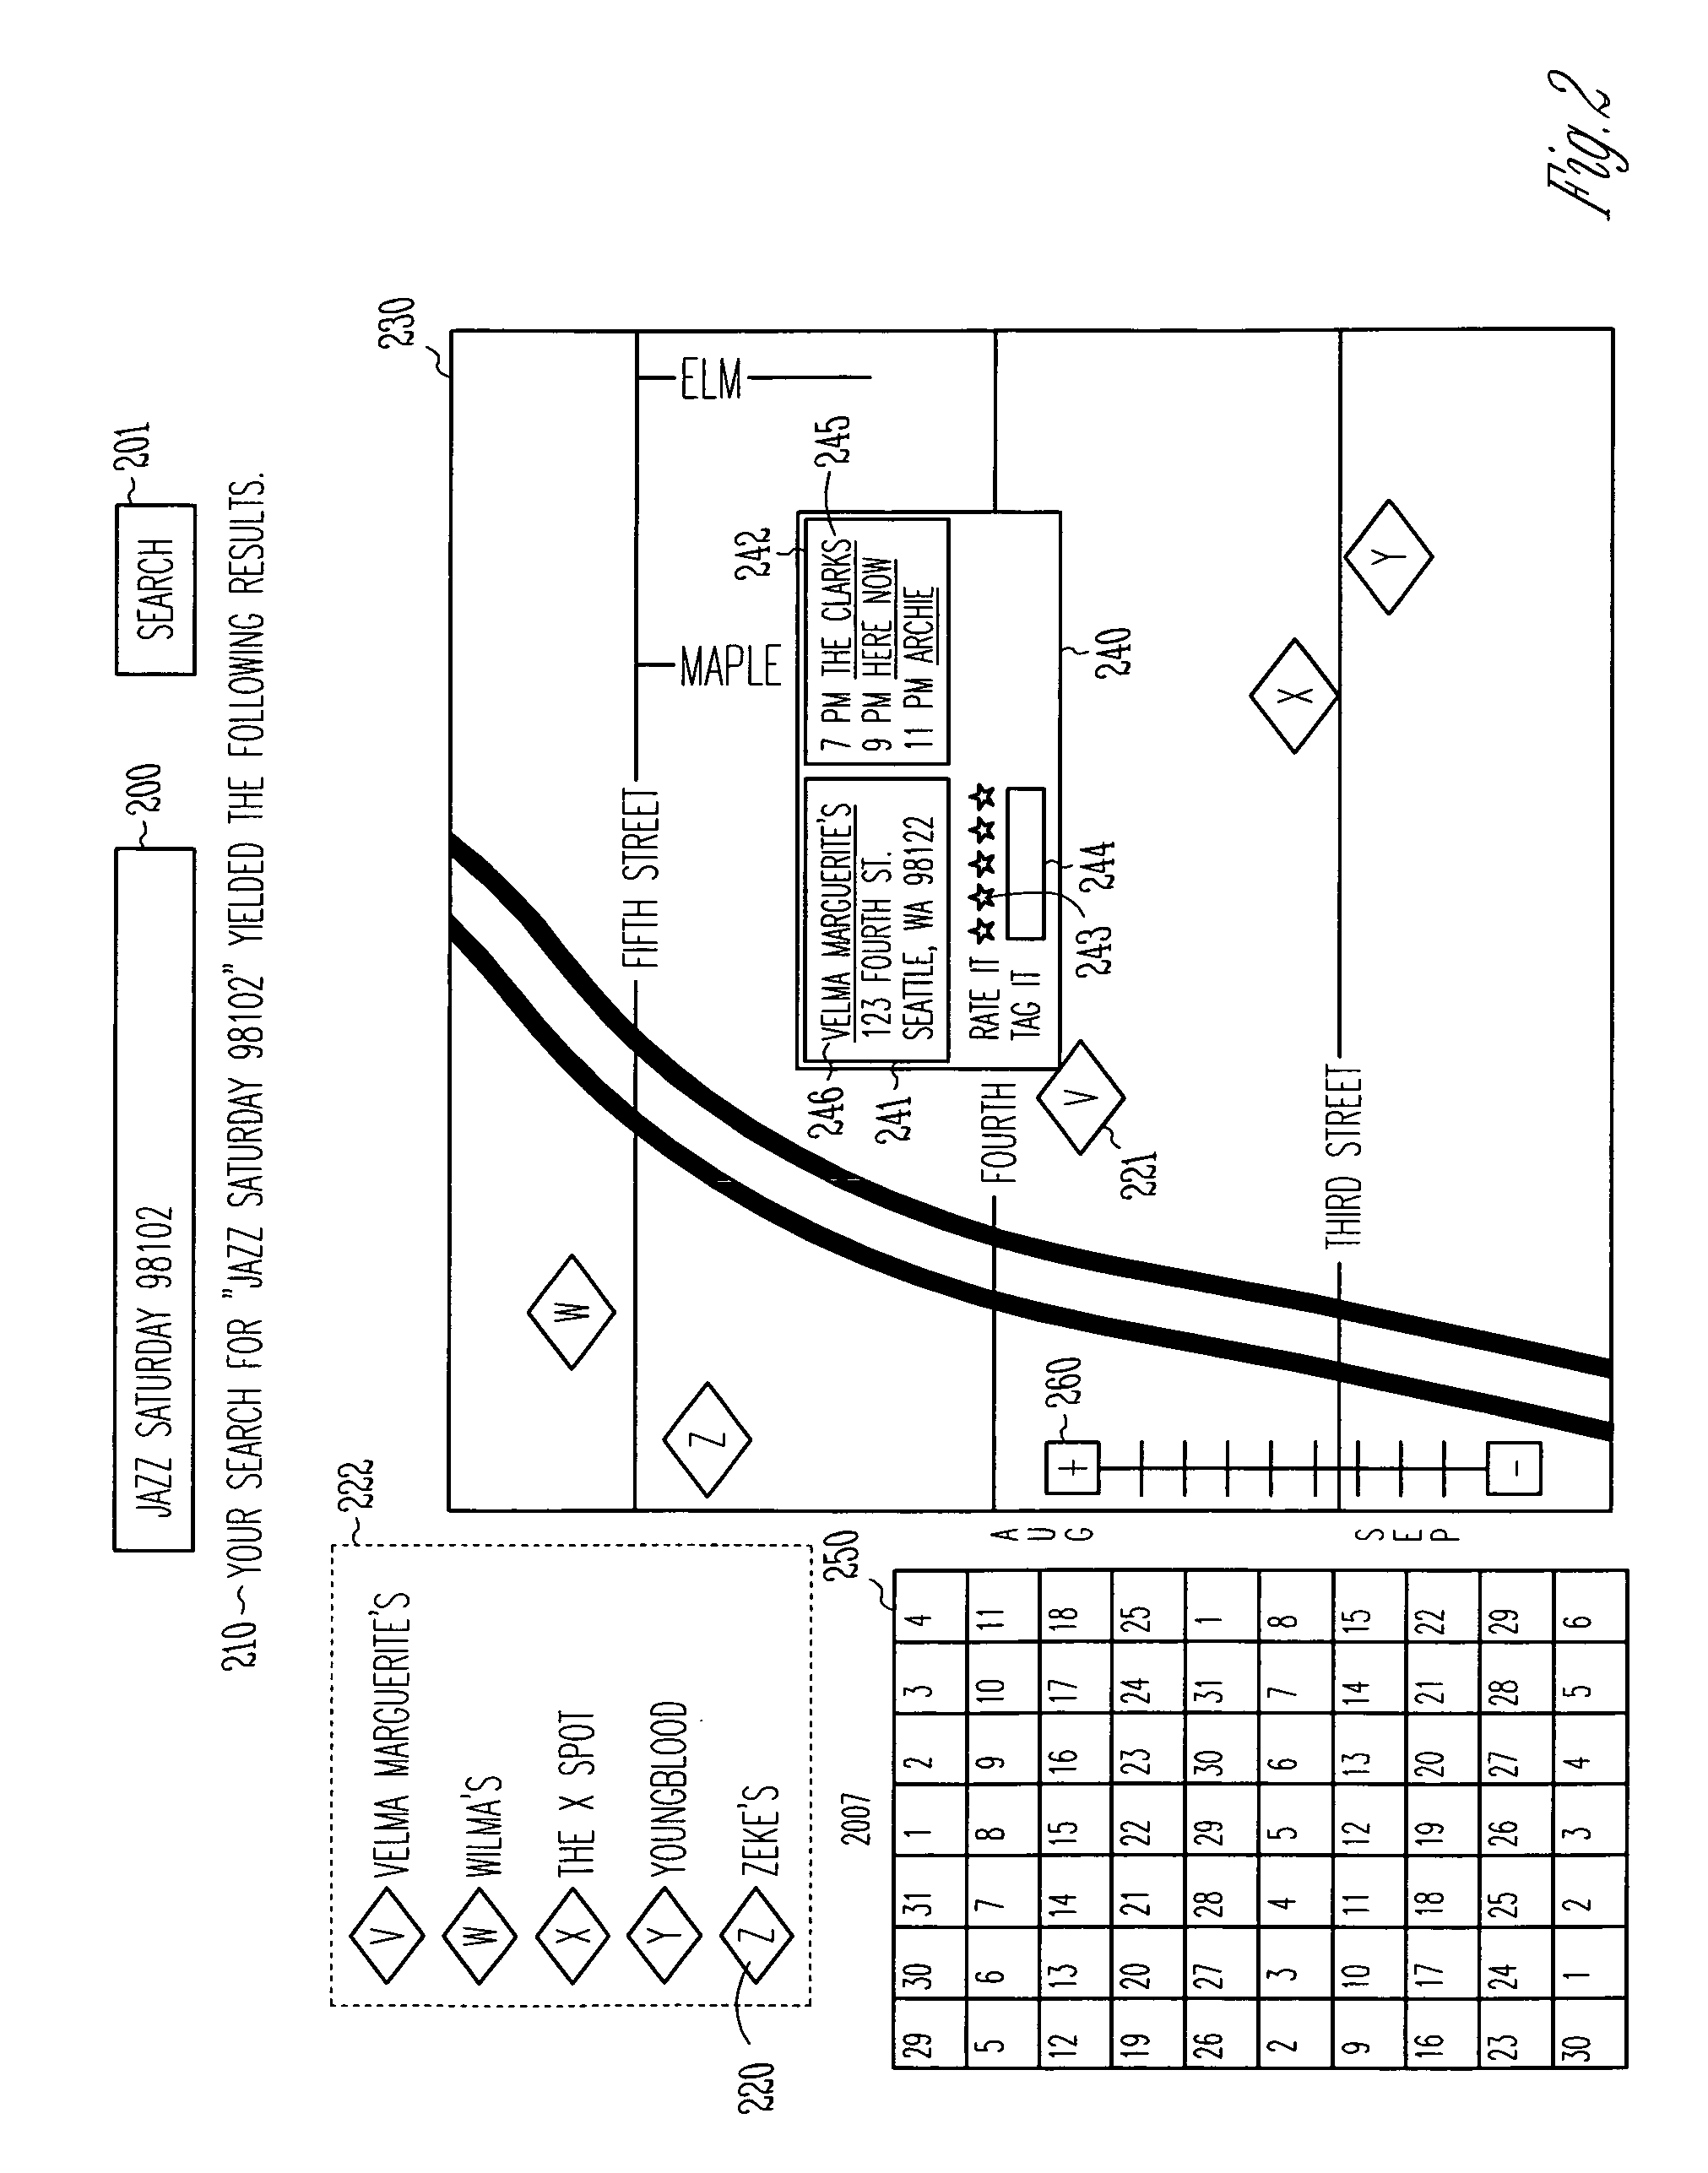 System and method for capturing, integrating, discovering, and using geo-temporal data